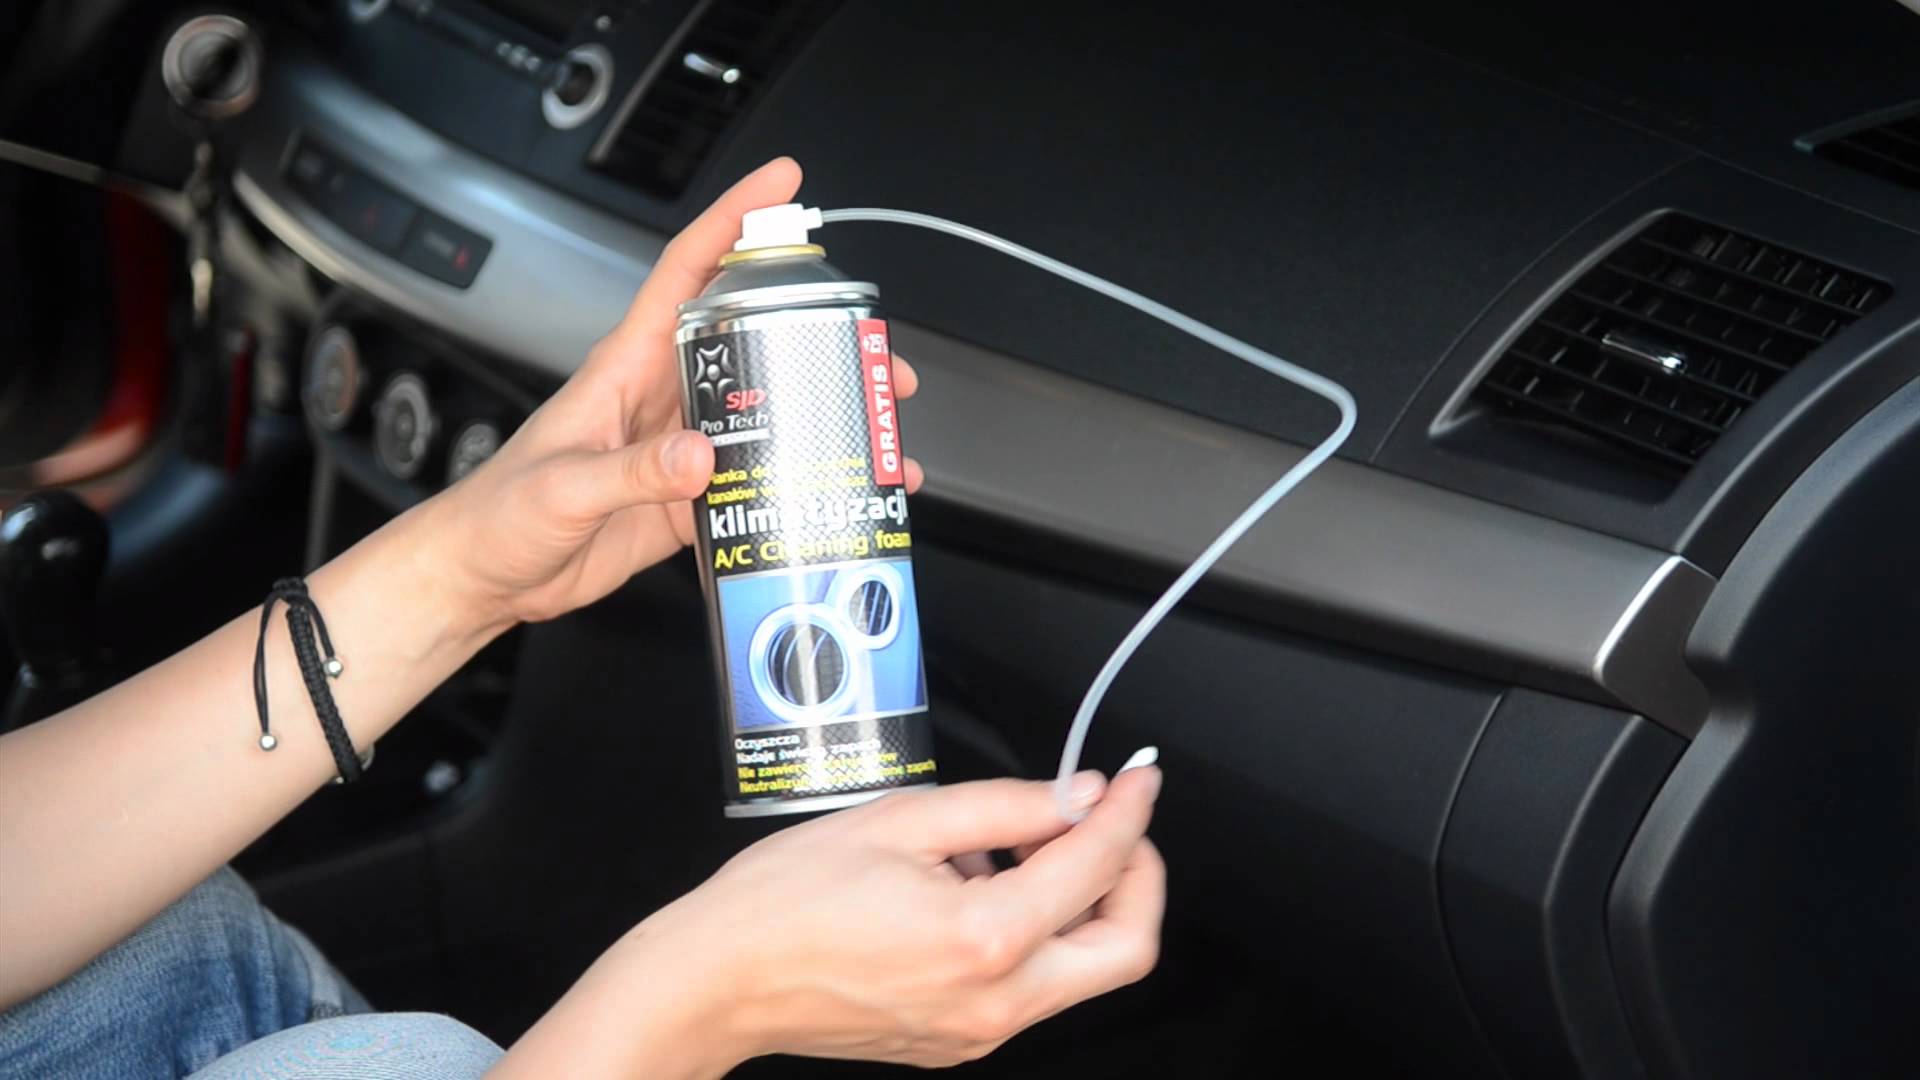 clean vents using enzymatic cleaner spray